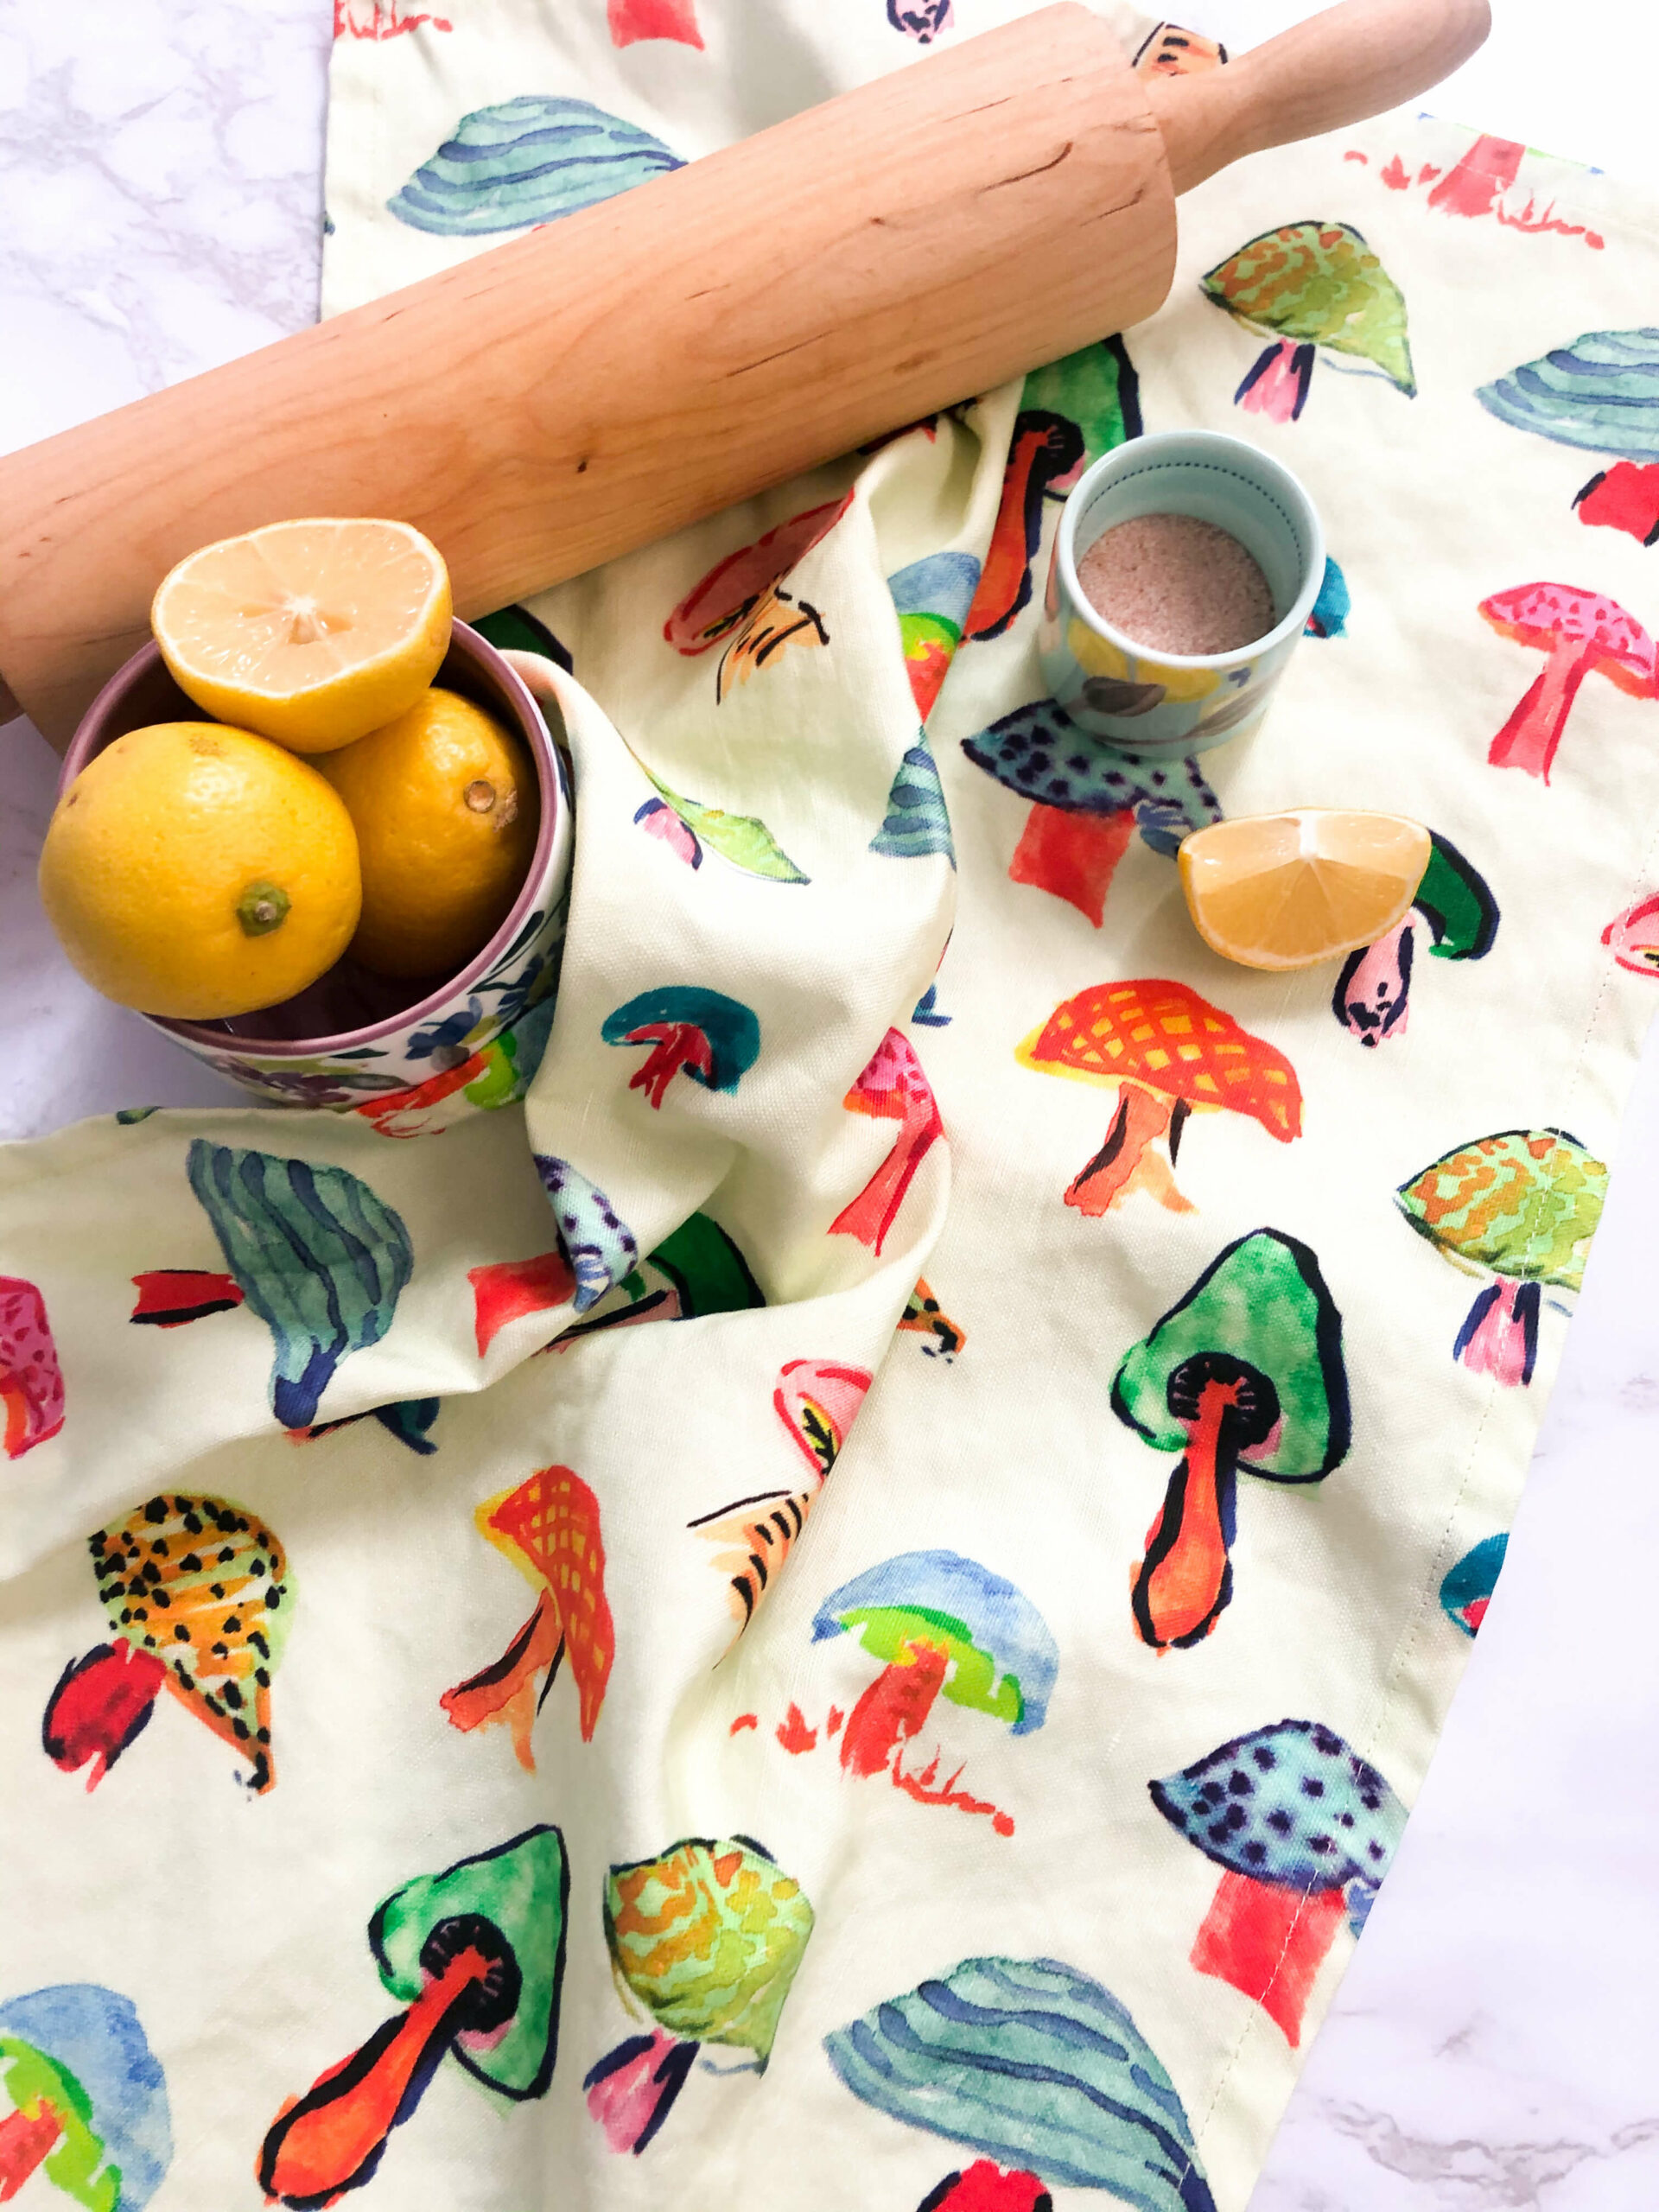 Introducing the Spring 2021 Spoonflower Small Business Grant Recipients